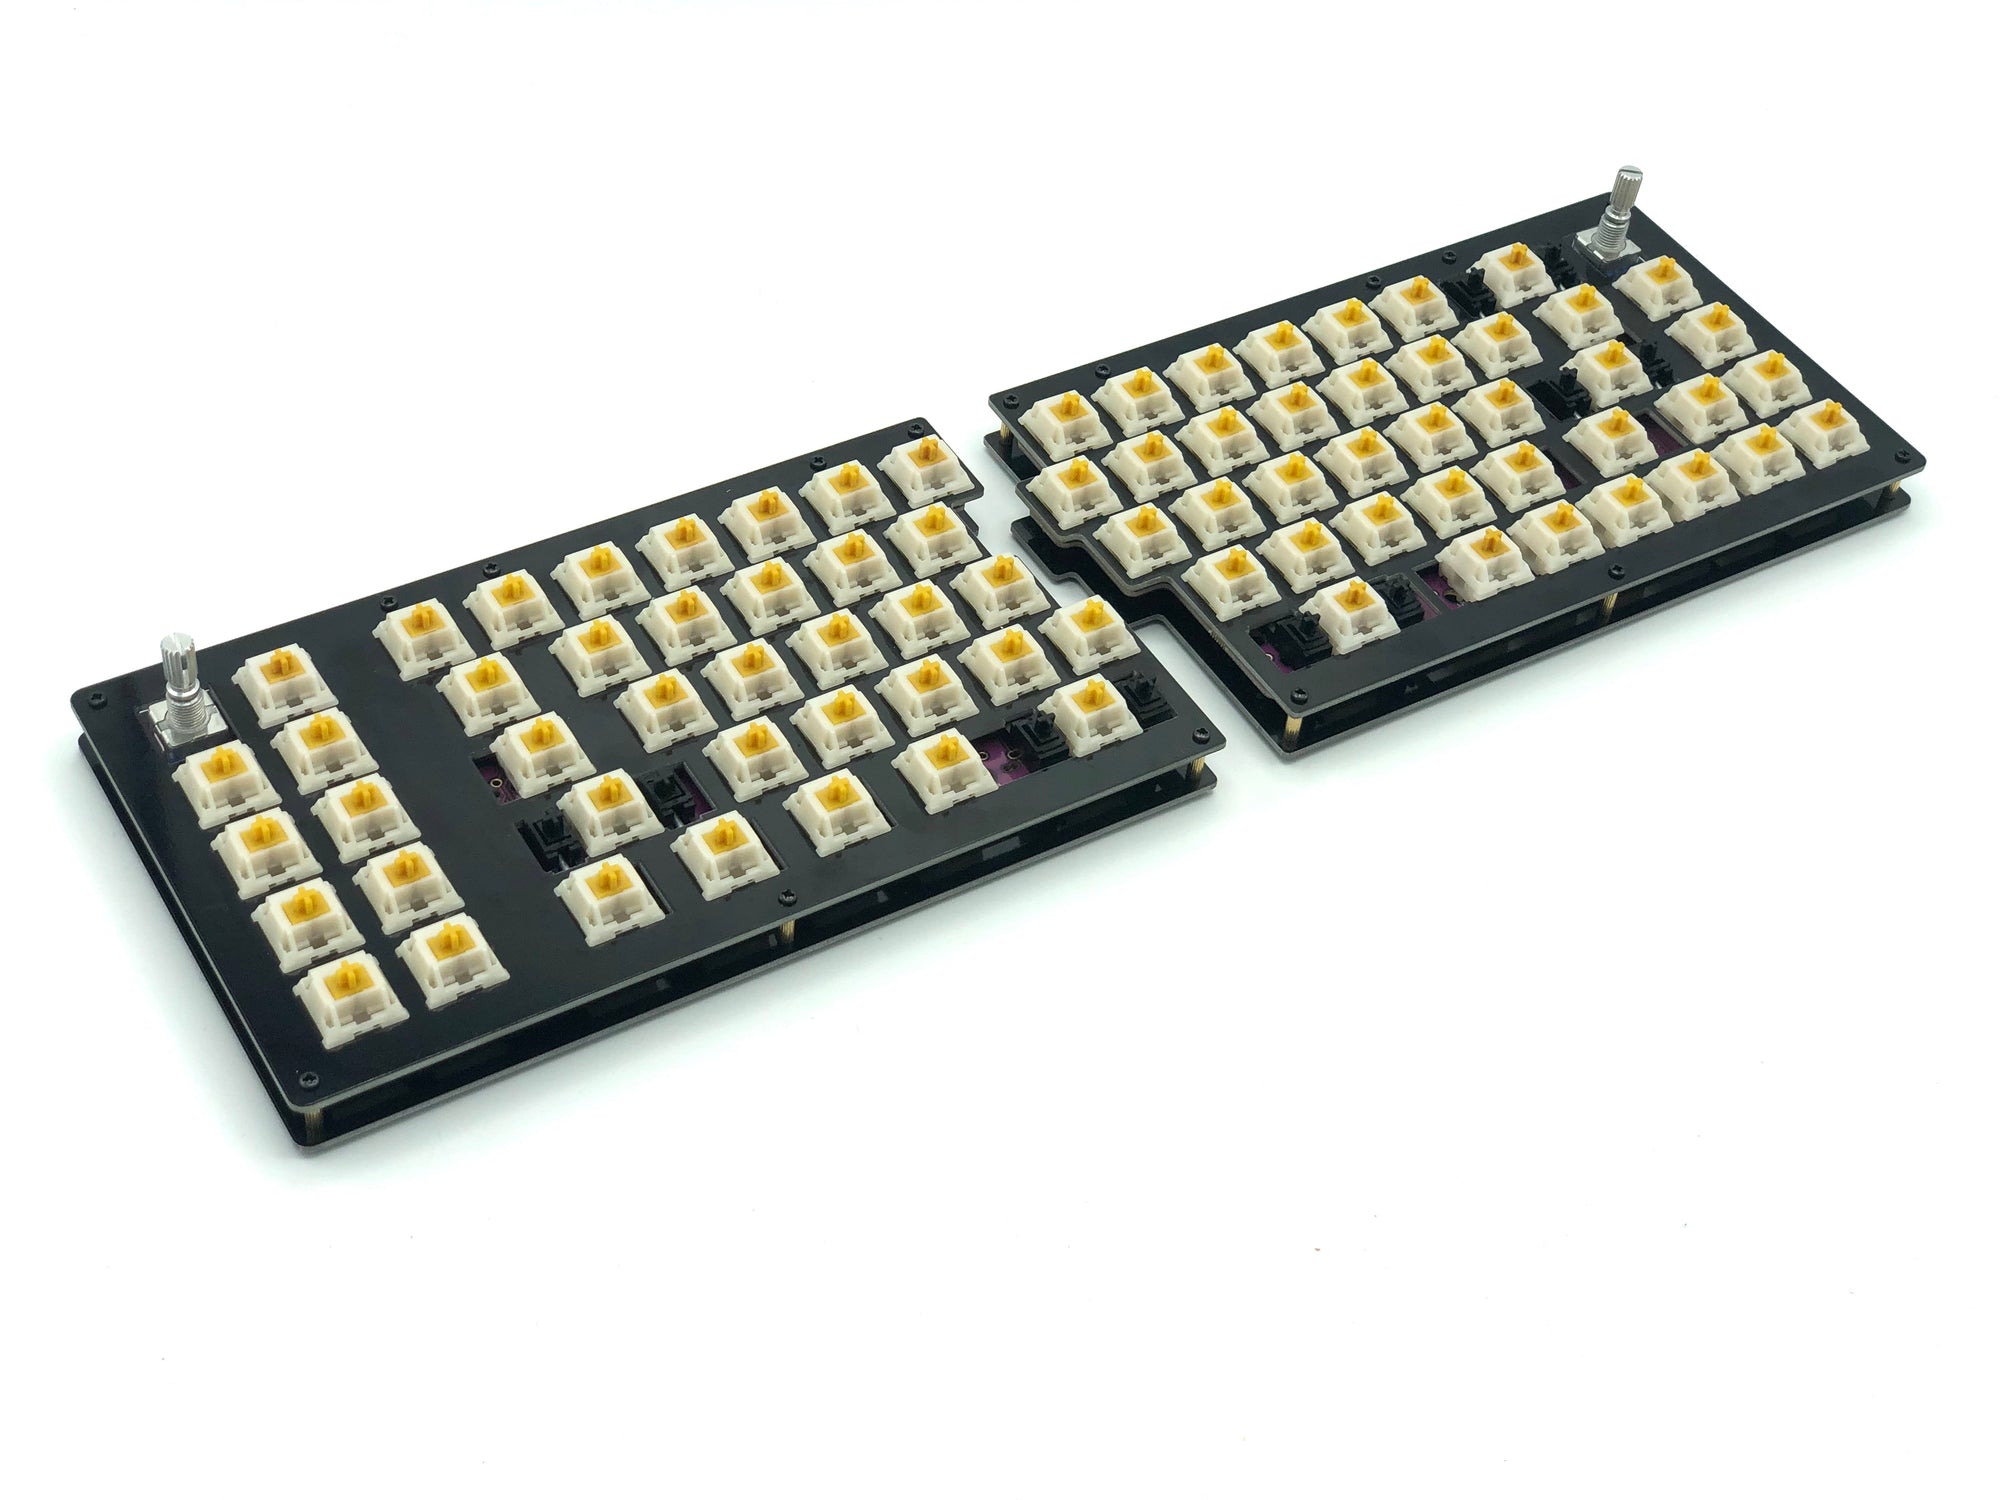 Quefrency keyboard built with yellow and white switches, rotary encoders in the outer corners, and no keycaps.